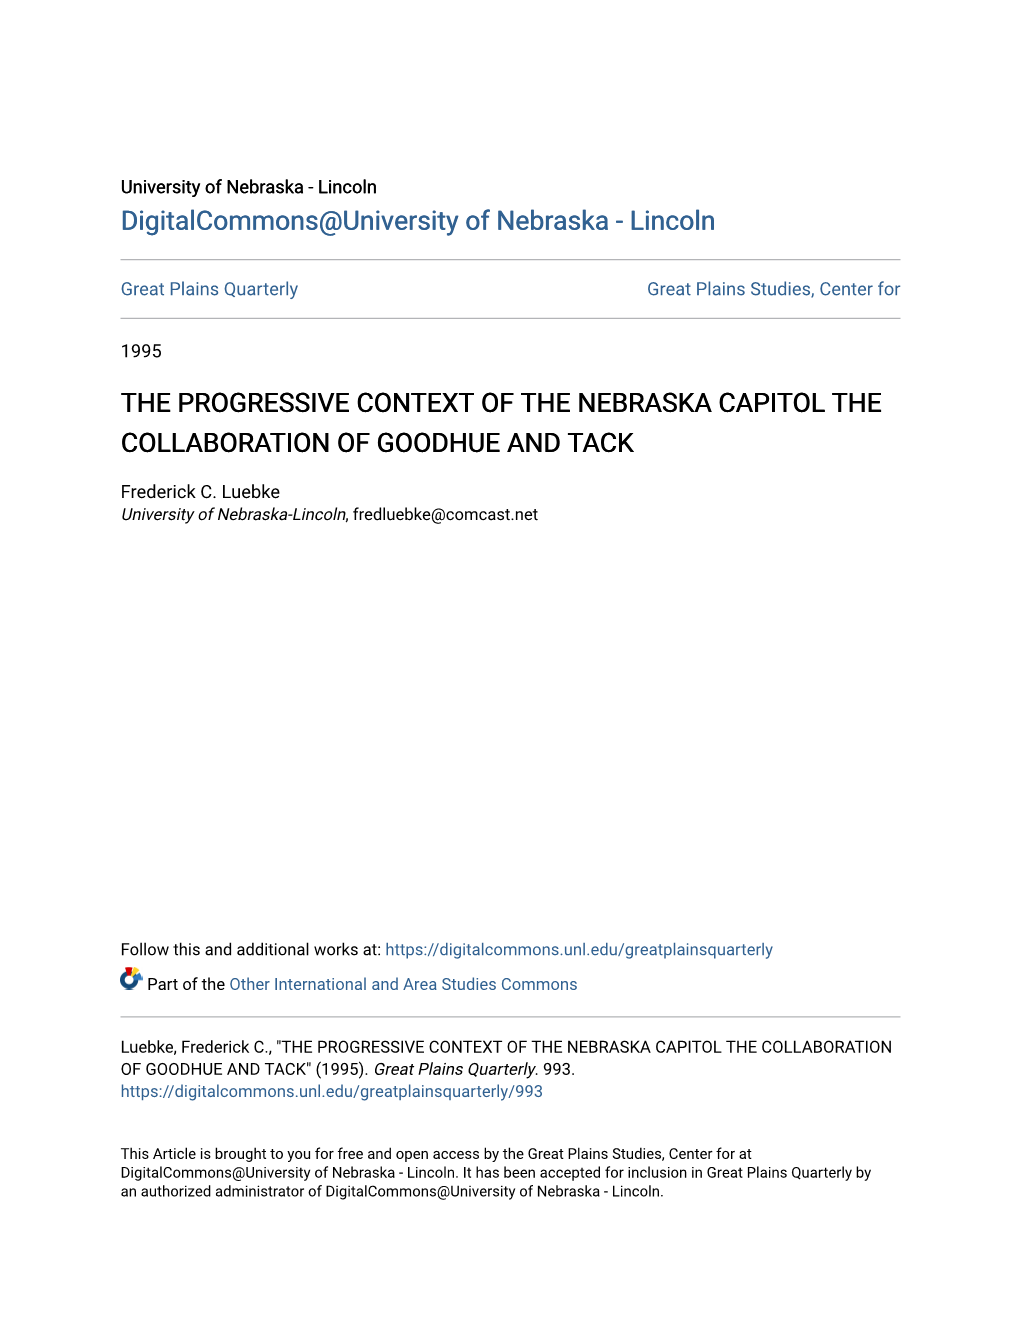 The Progressive Context of the Nebraska Capitol the Collaboration of Goodhue and Tack